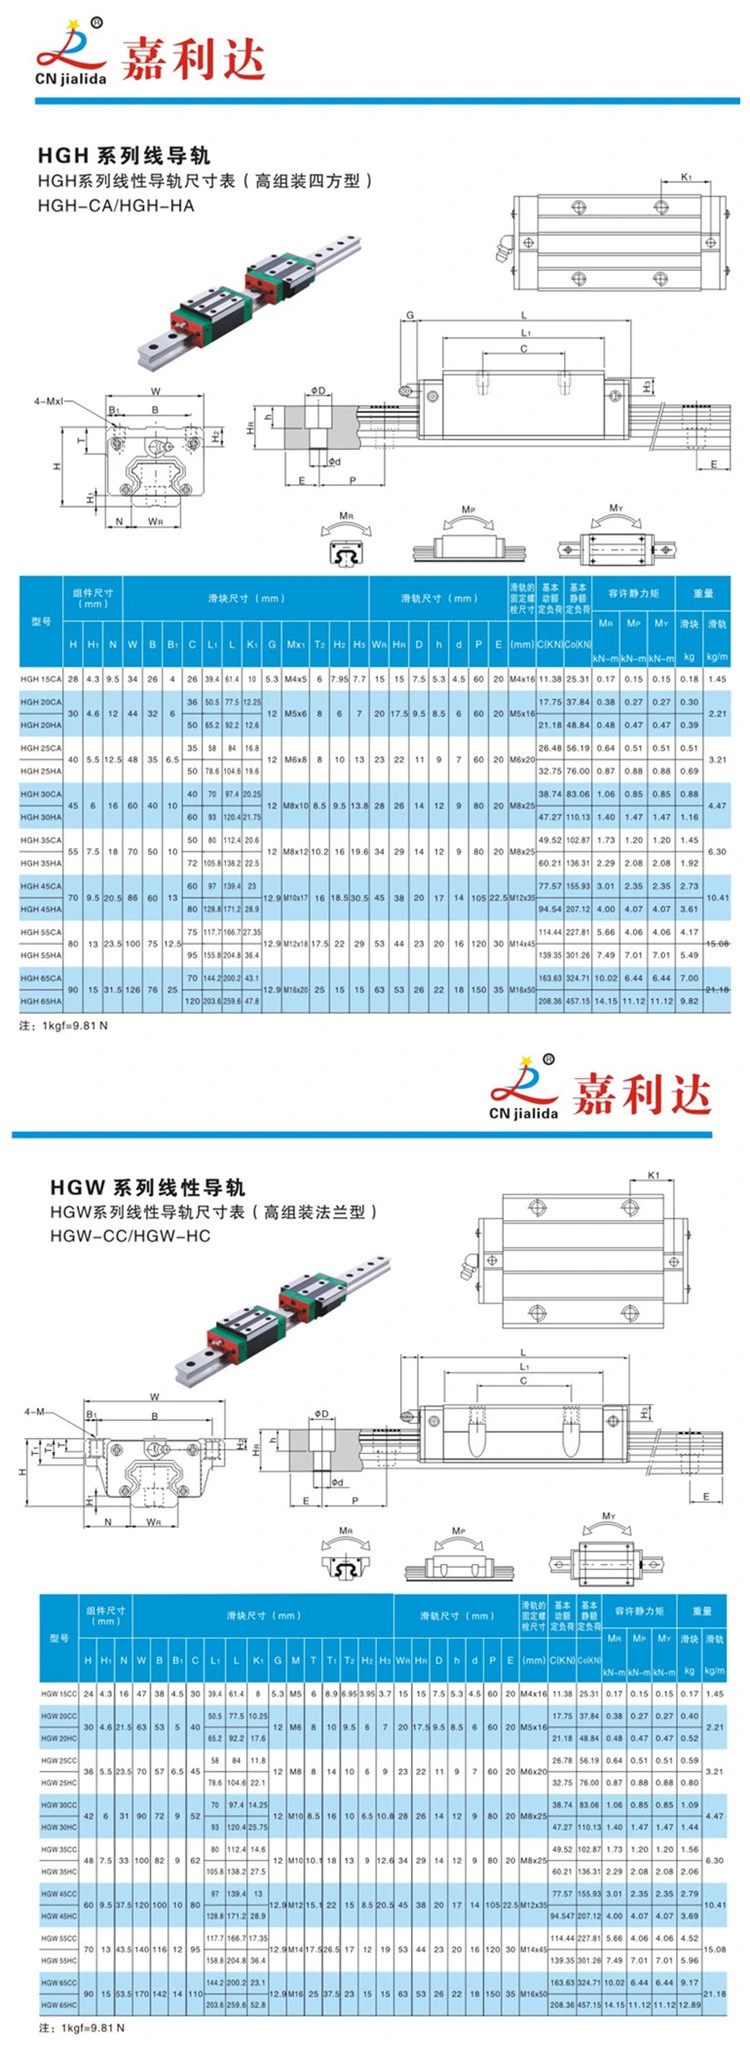 Good Quality and Low Price CNC Router Kit Guides (HGH 35CA)